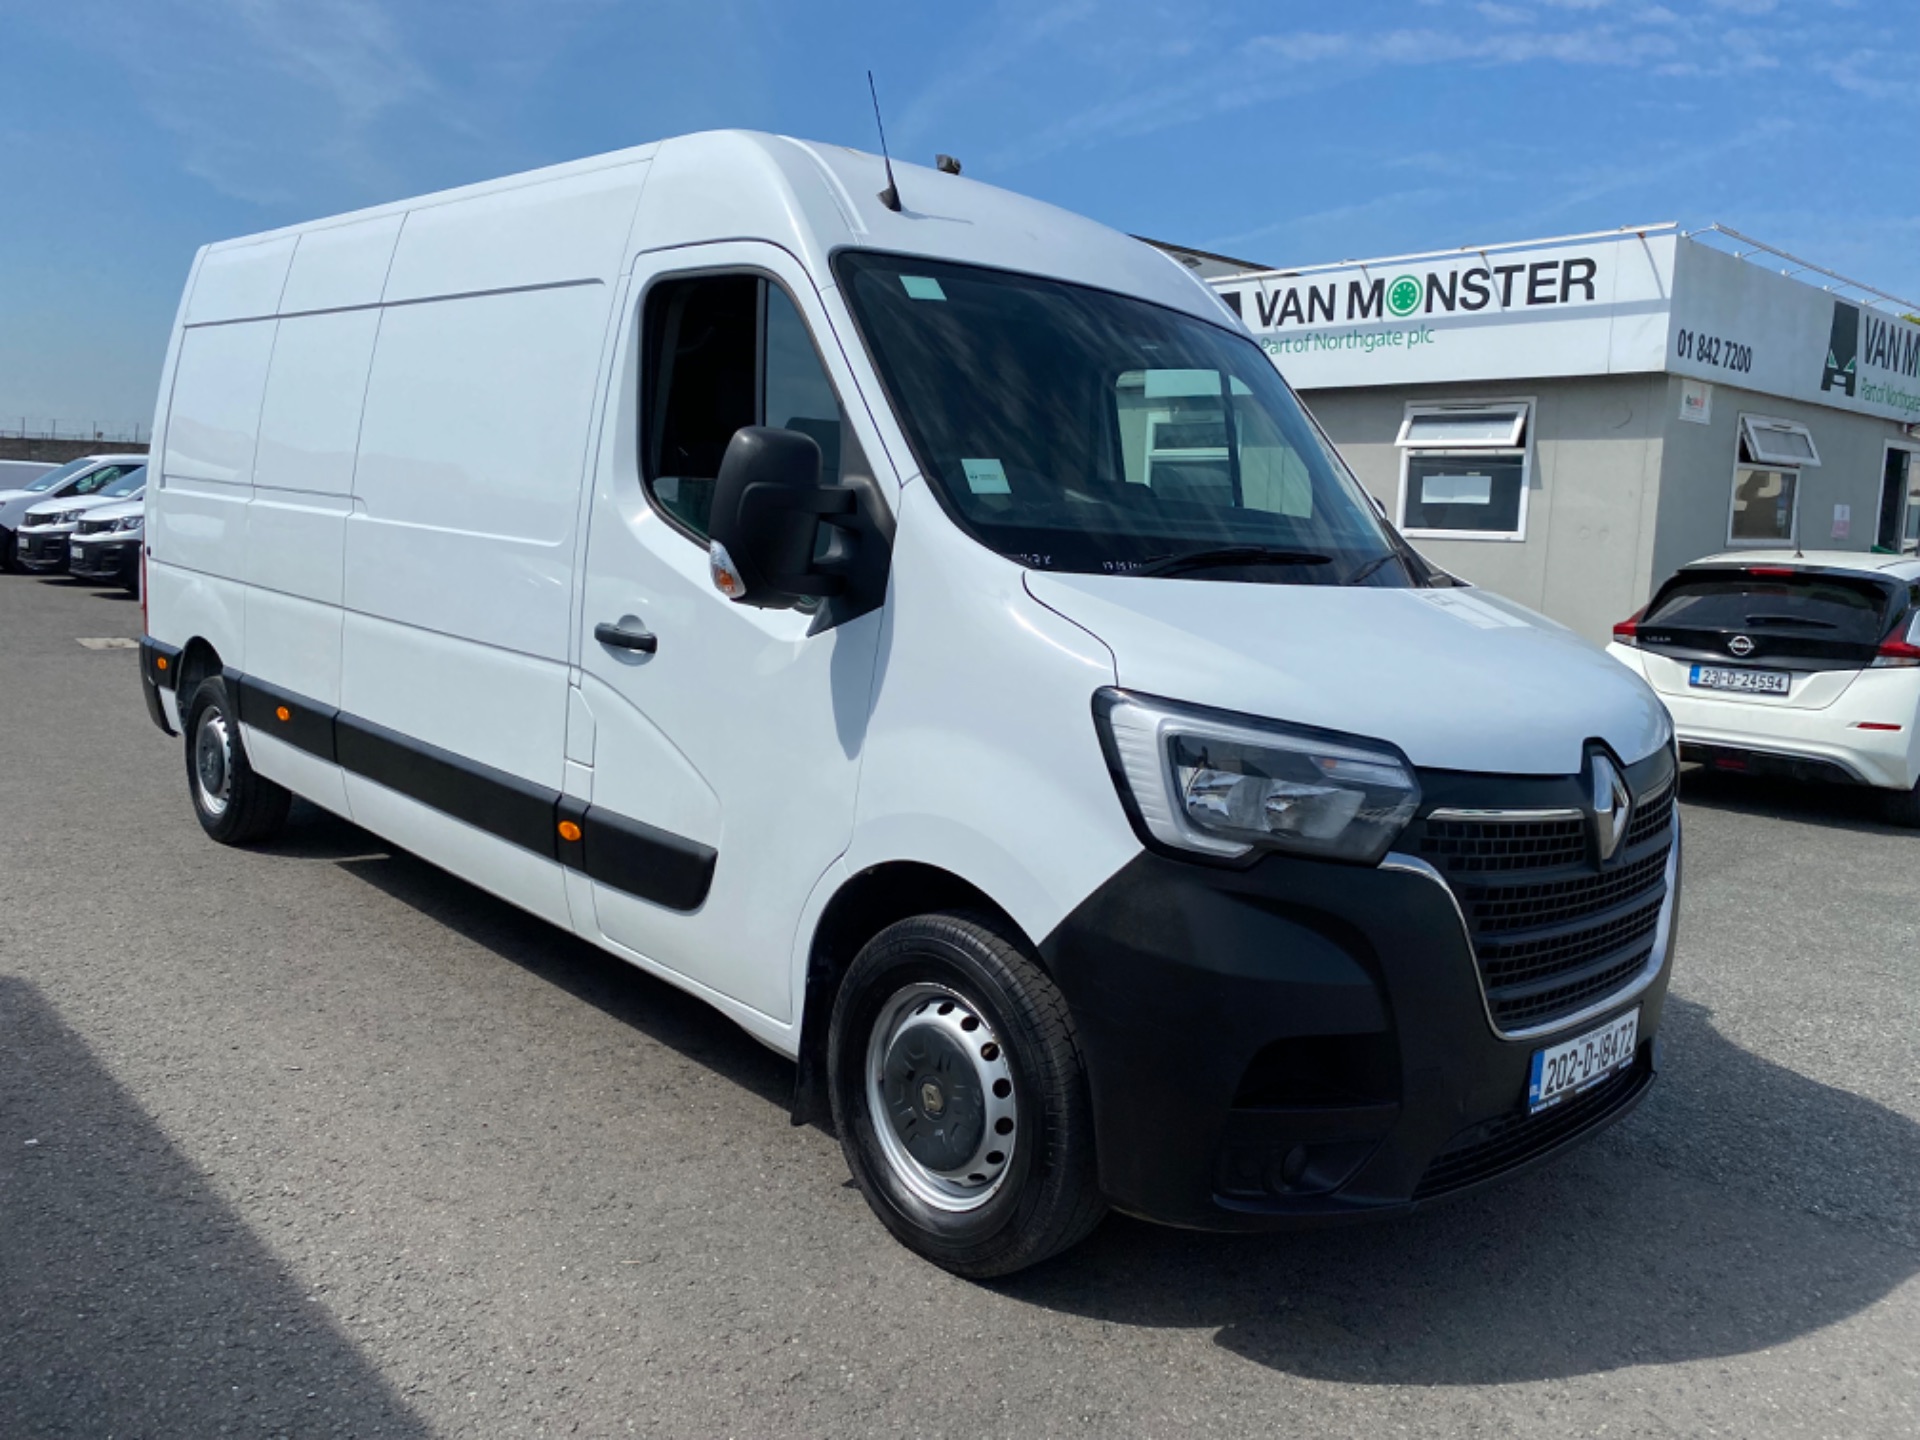 2020 Renault Master III PH2 FWD LM35 DCI 135 MY19 (202D18472)